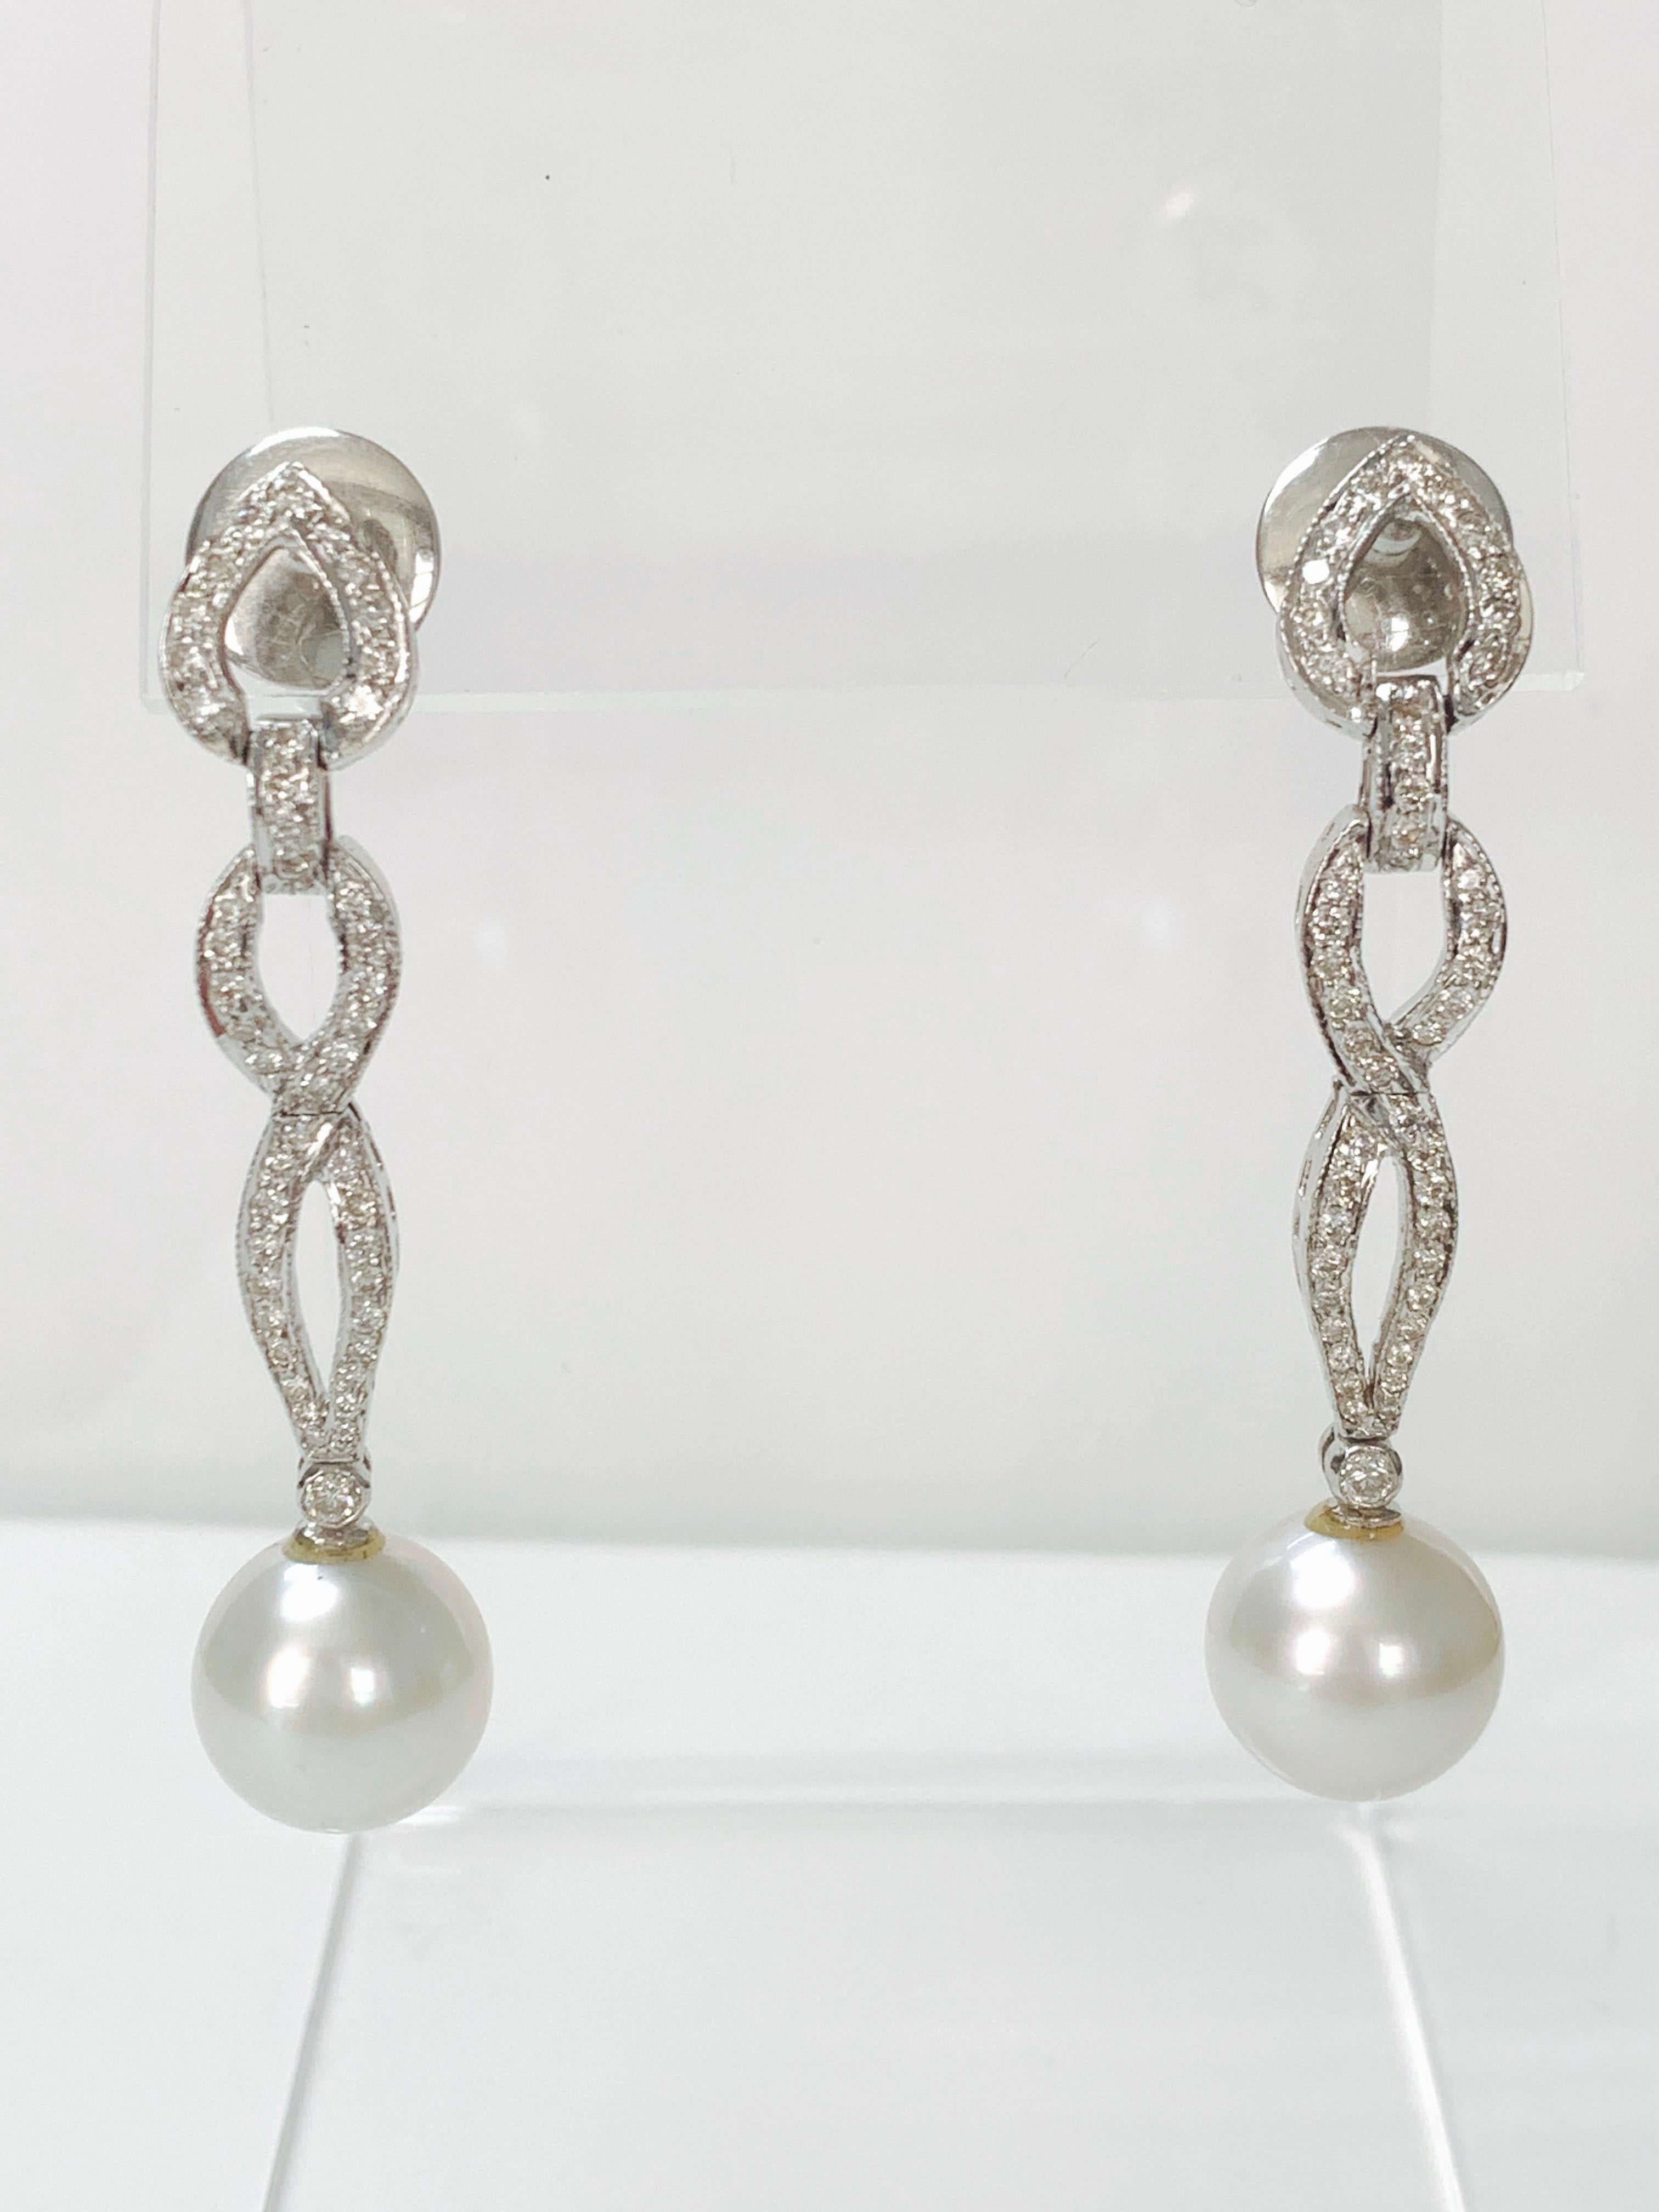 Very classy diamond and south sea pearl earrings in 18k white gold. 
The details are as follows : 
Diamond weight : 1.15 carat ( GH color and VS clarity) 
South sea pearls : 11mm each 
Measurements : 2 inches long 
Metal : 18k white gold 